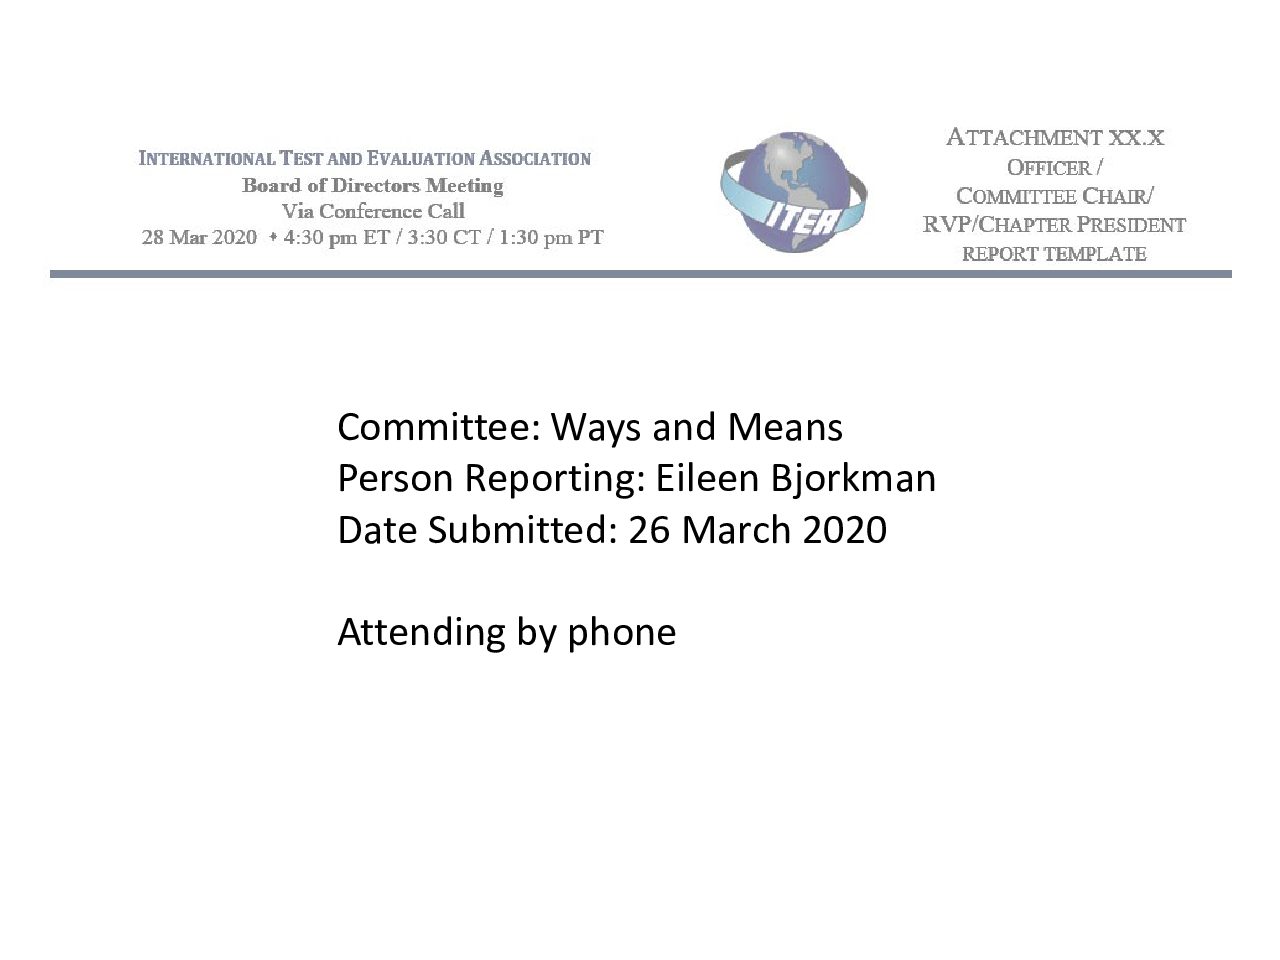 032820_AT05.0_Ways and Means Committee Report